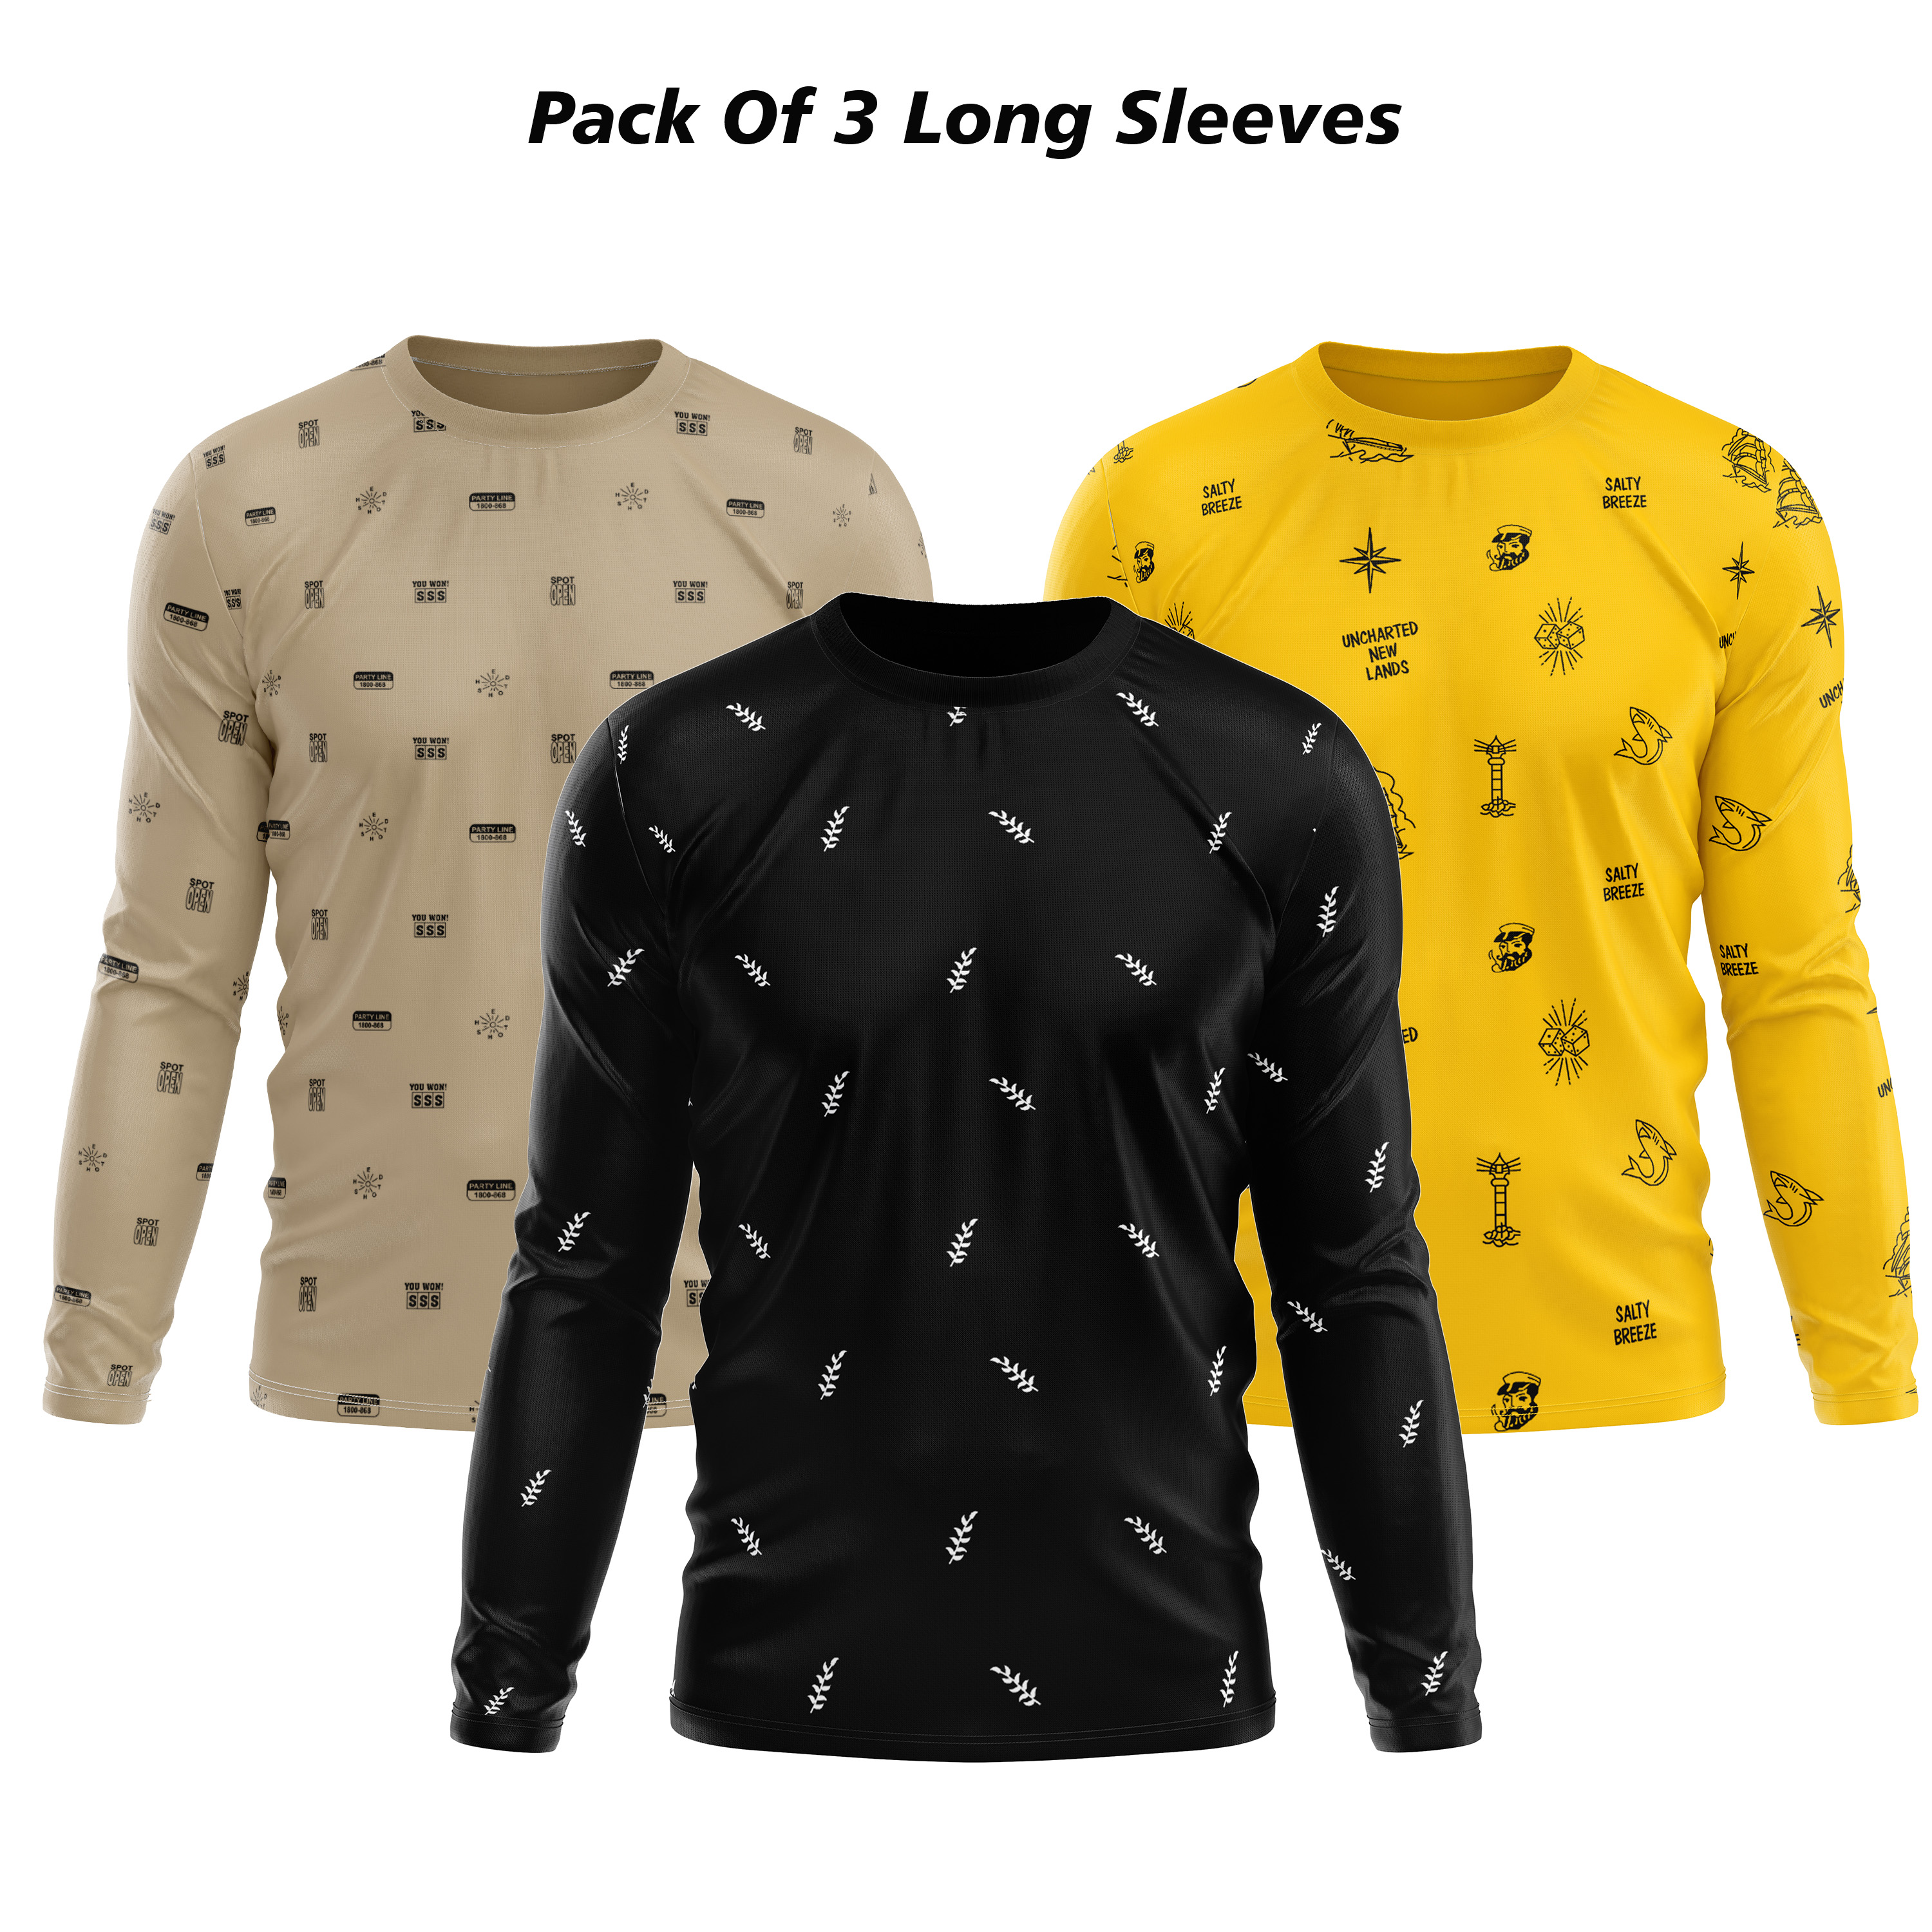 New Long Sleeves Allover Printed Casual Summer Fashion Pack Of 3 Tshirt For Men